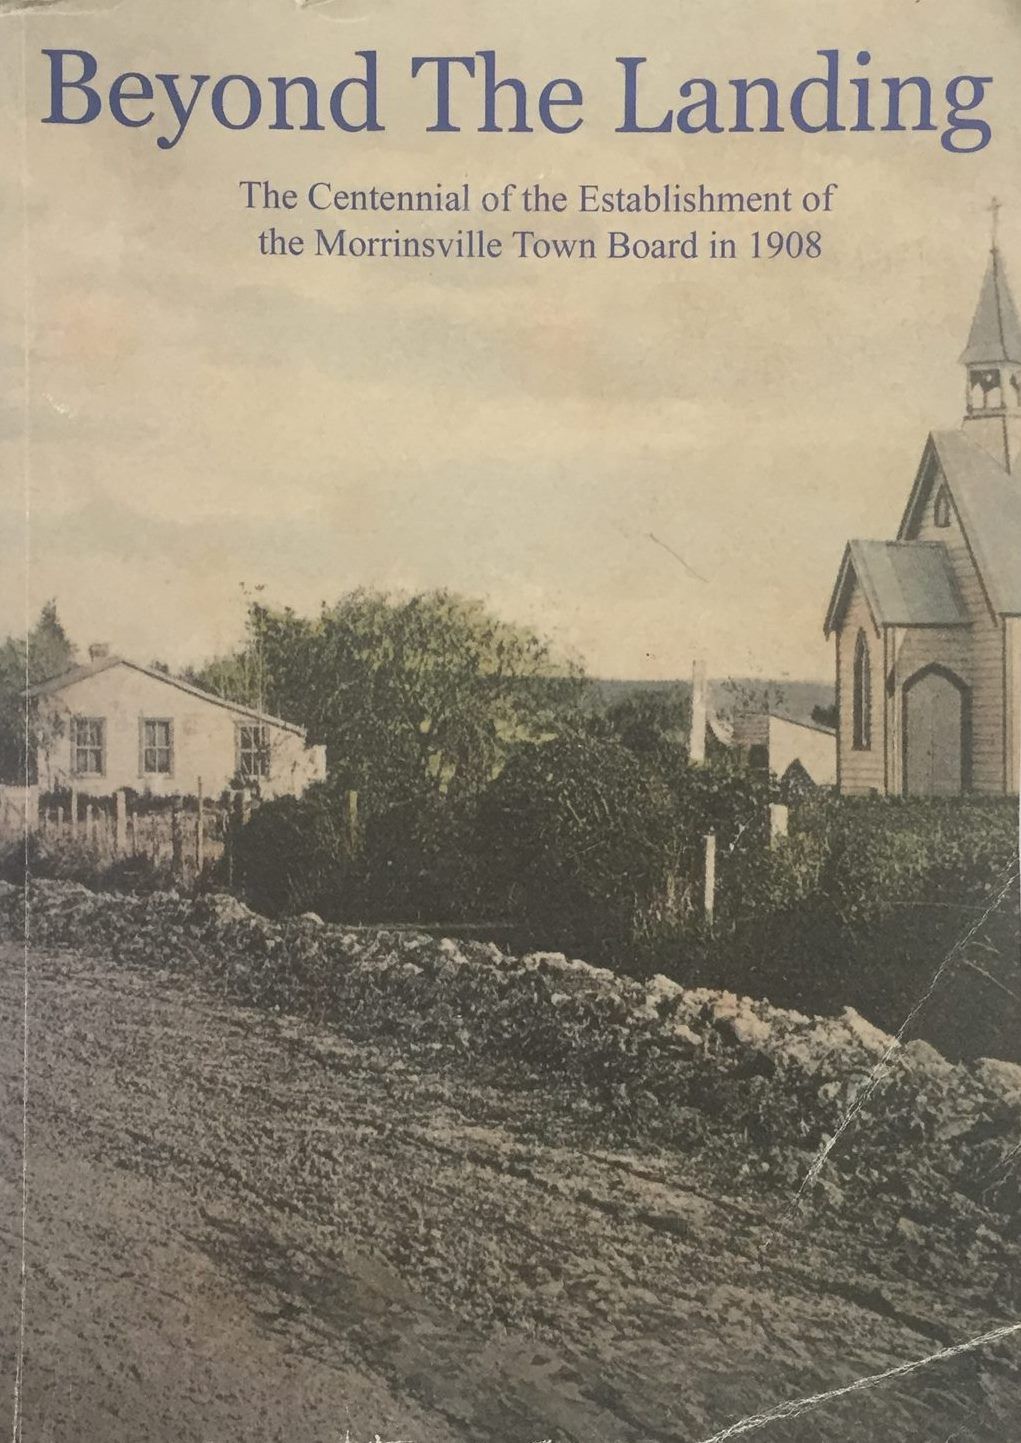 BEYOND THE LANDING: The Establishment of Morrinsville Town Board from 1908